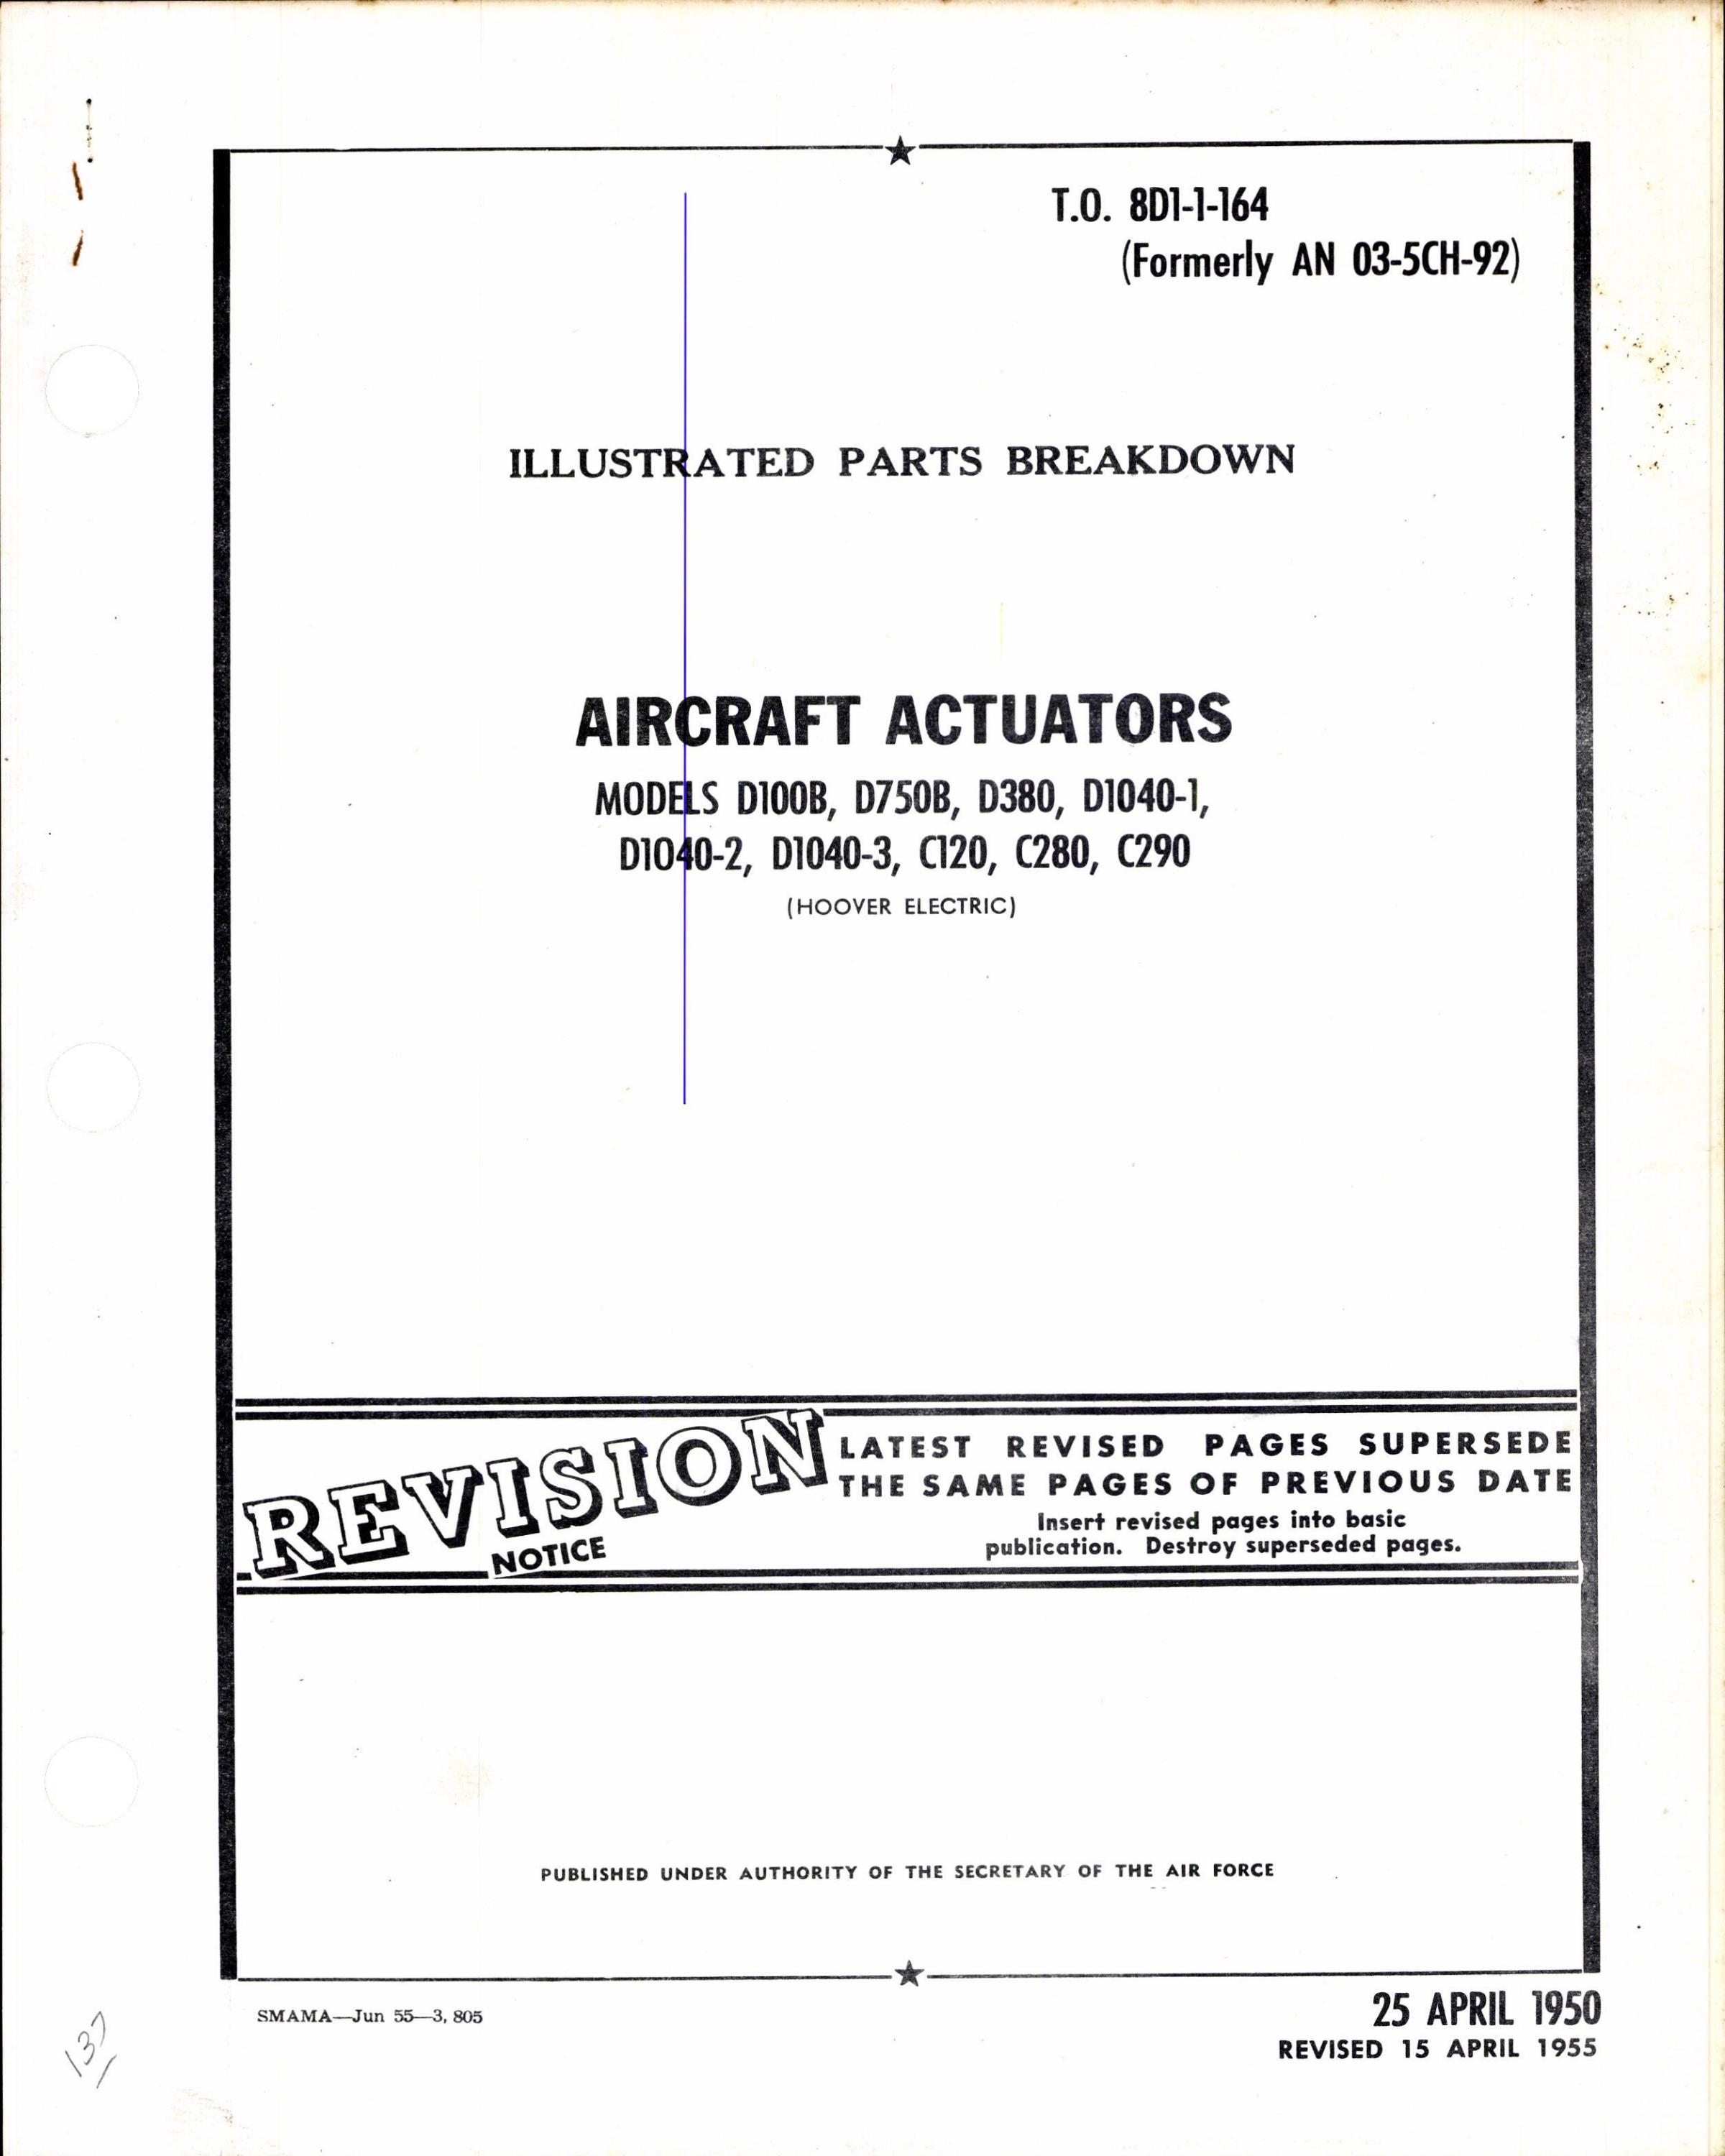 Sample page 1 from AirCorps Library document: Overhaul Instructions for Aircraft Actuators Models D100B, D750B, D380, D1040-1, D1040-2, D1040-3, C120, C280, and C290